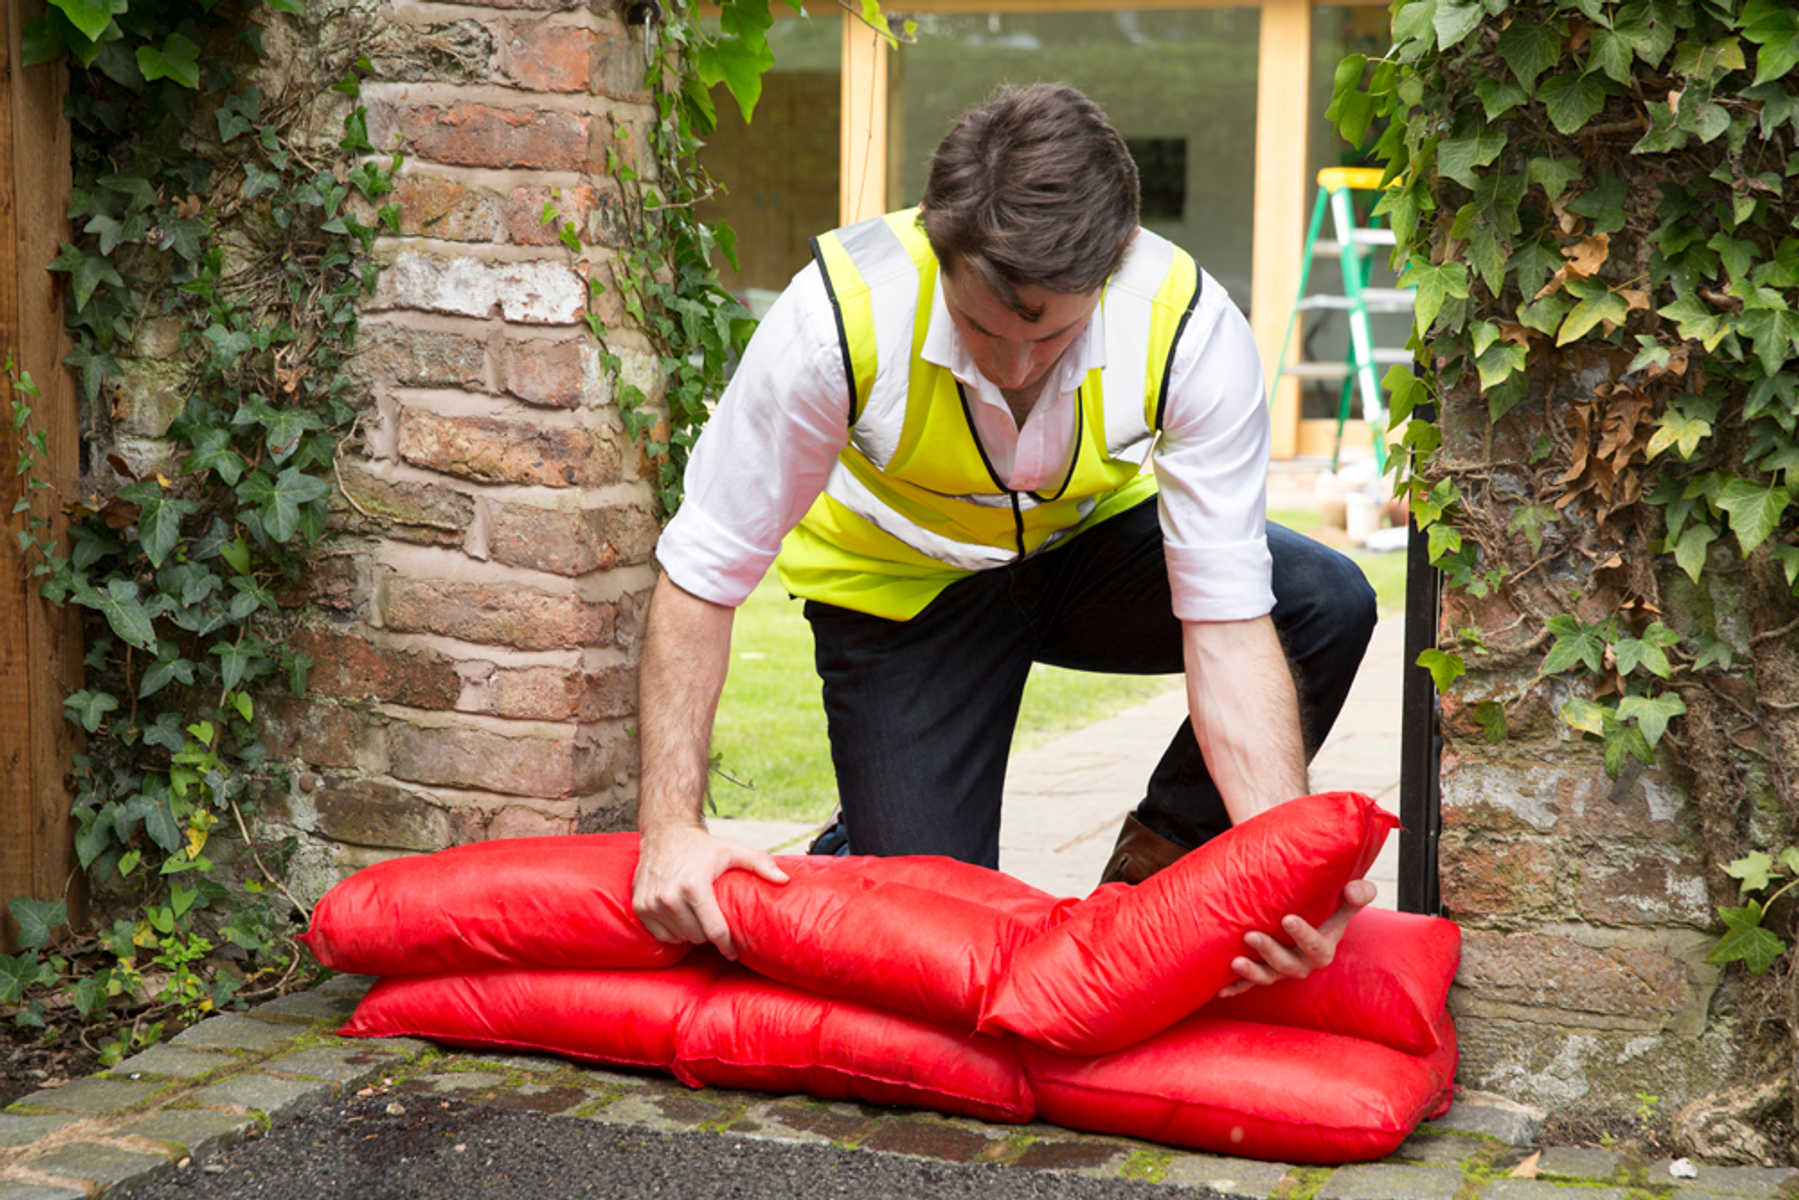 Flood Protection and Flood Defences - Prepare Yourself and Protect Your Home